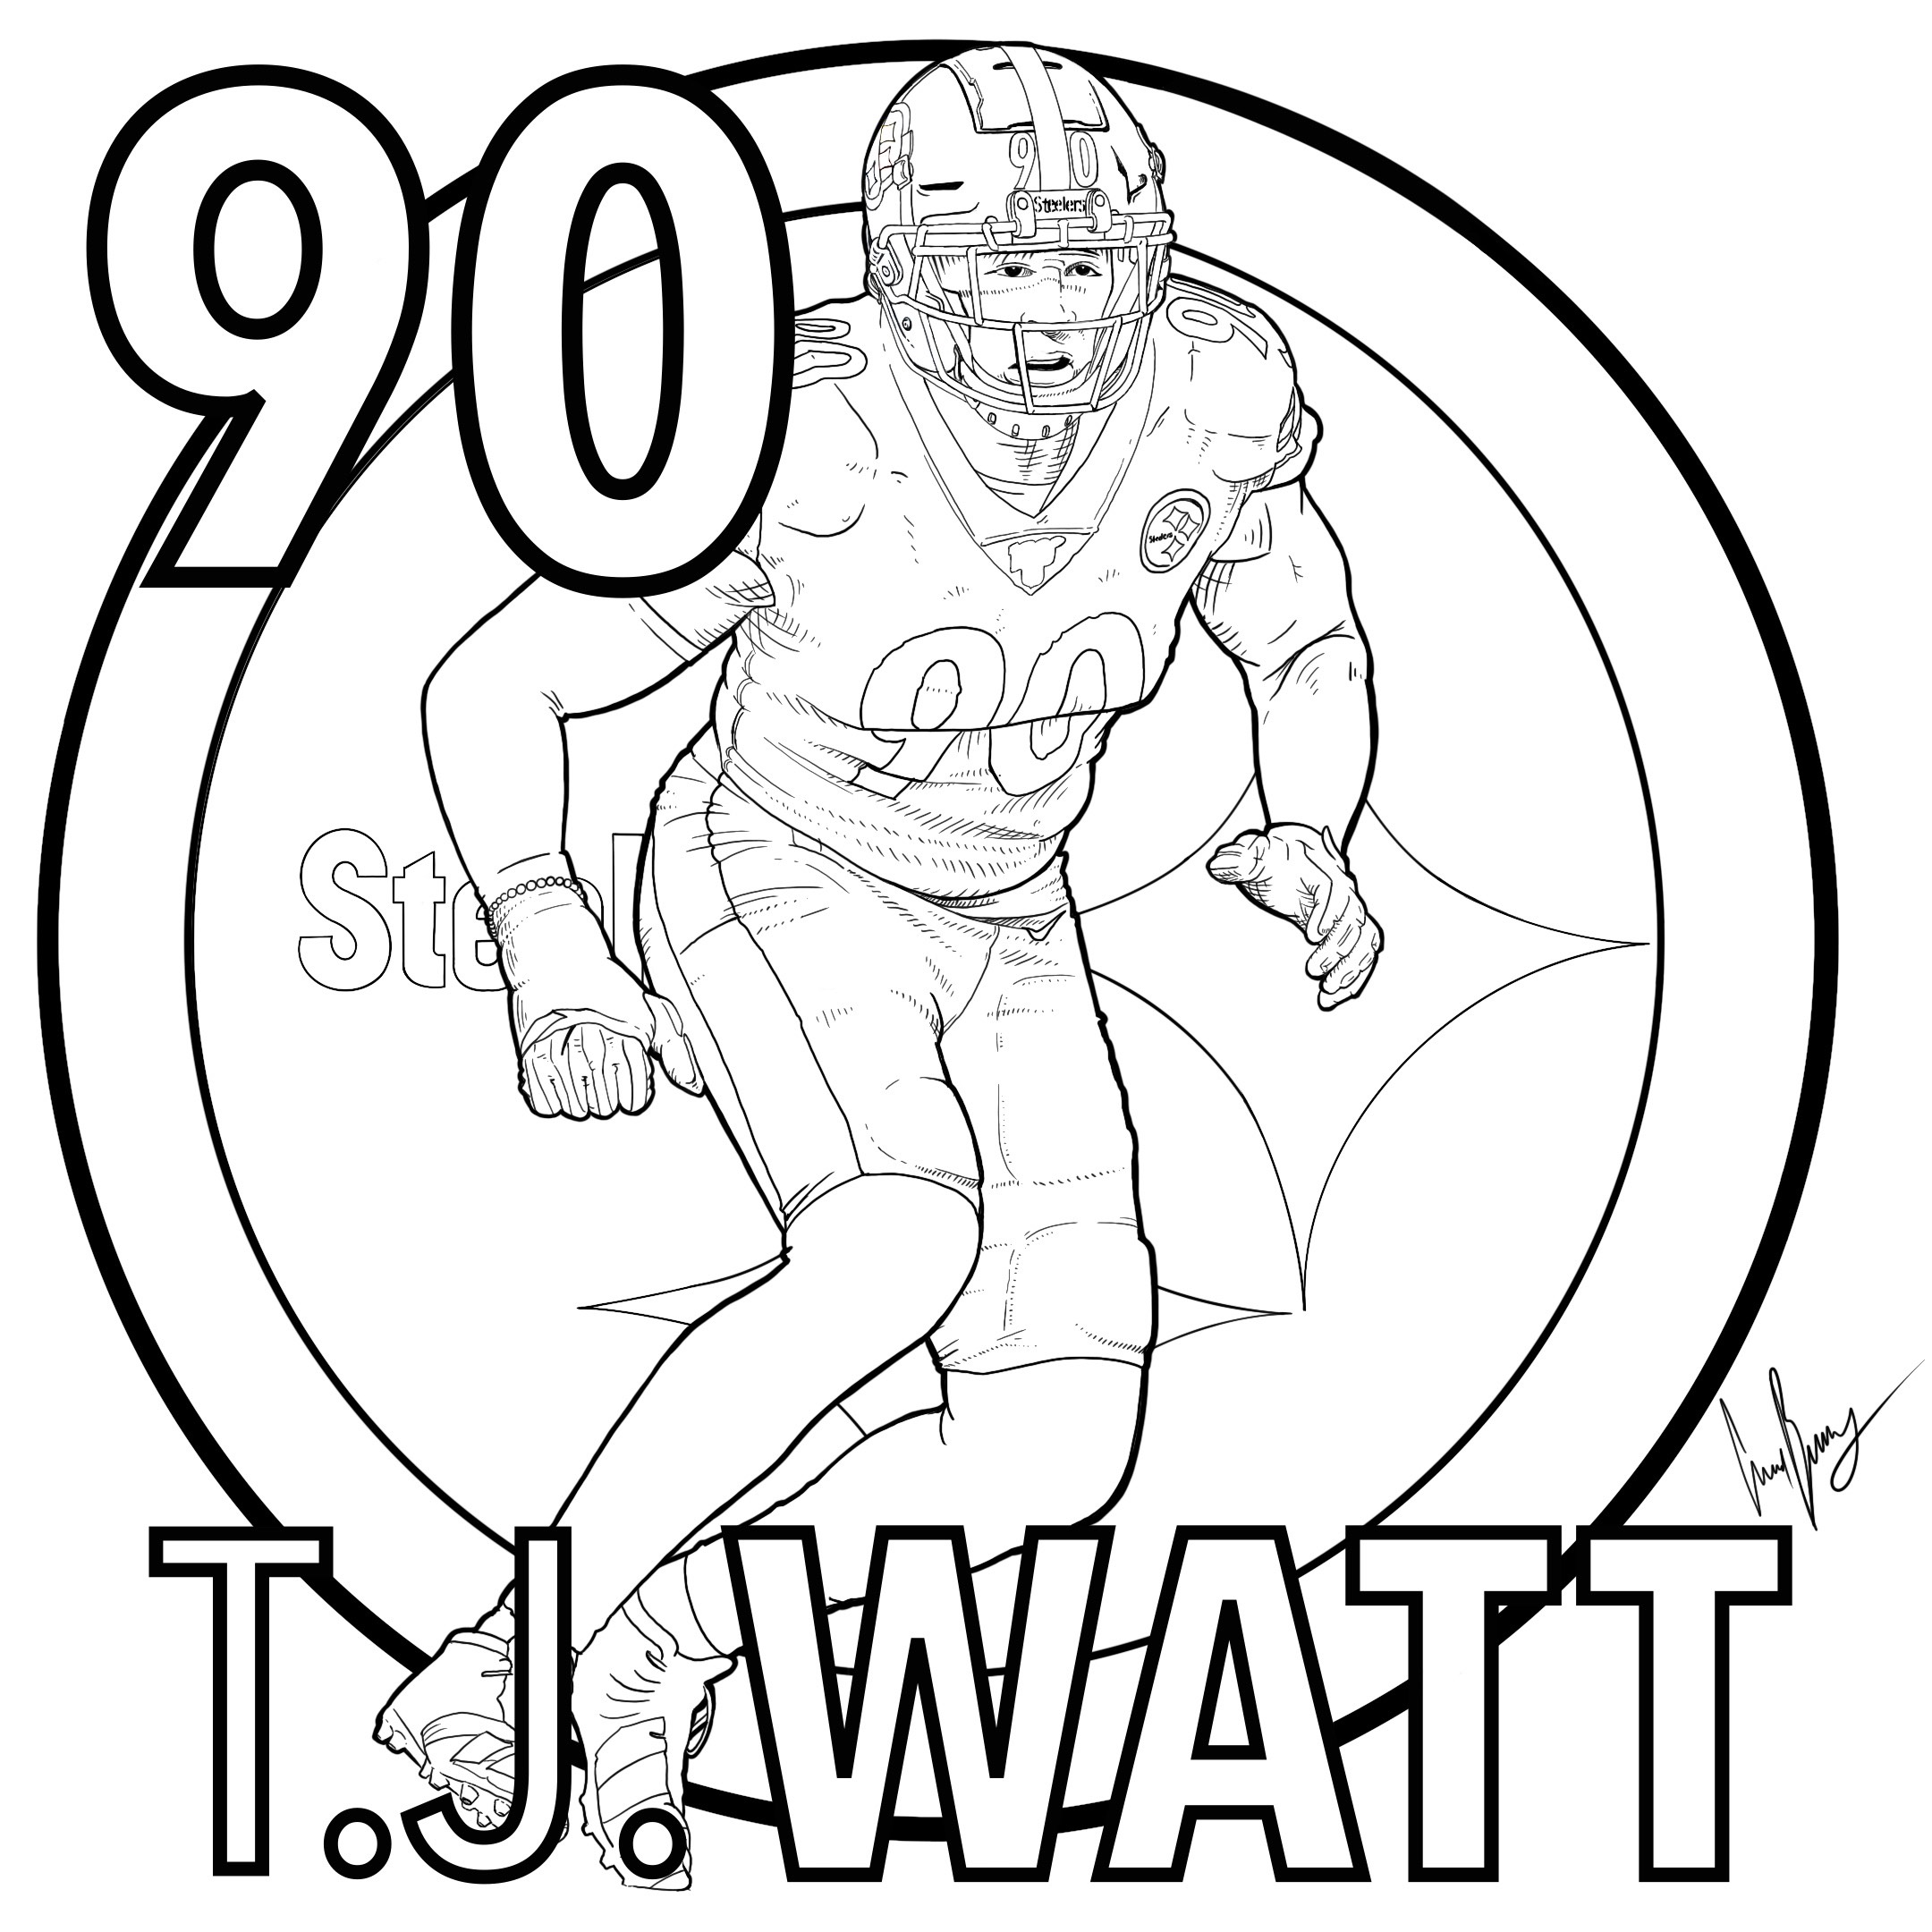 Pittsburgh Steelers Coloring Pages   Pittsburgh Steelers ...